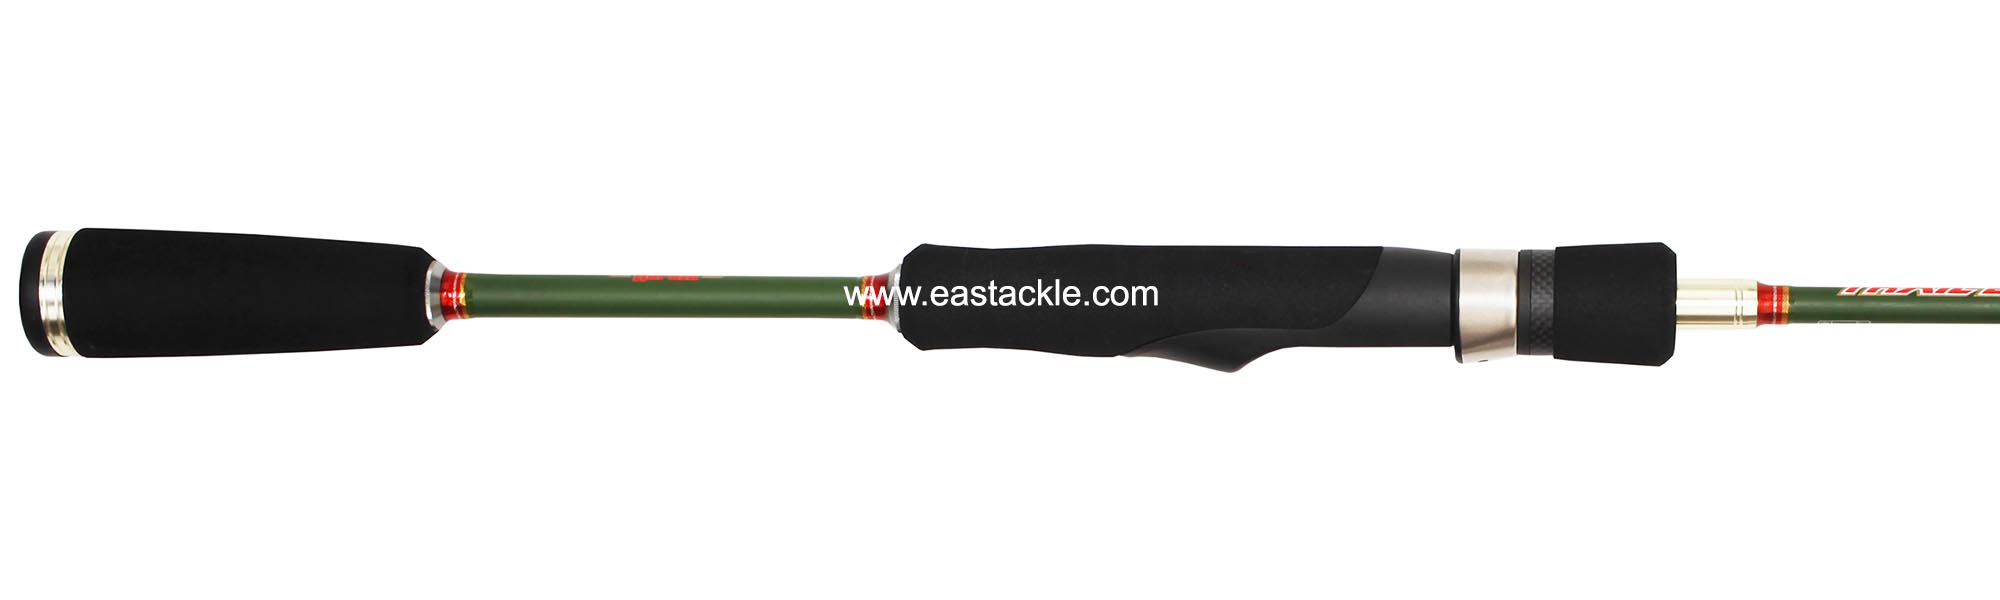 Rapala - Trail Blazer - TRS664MHRF - Spinning 4 Piece Travel Rod - Rear Section (Side View) | Eastackle